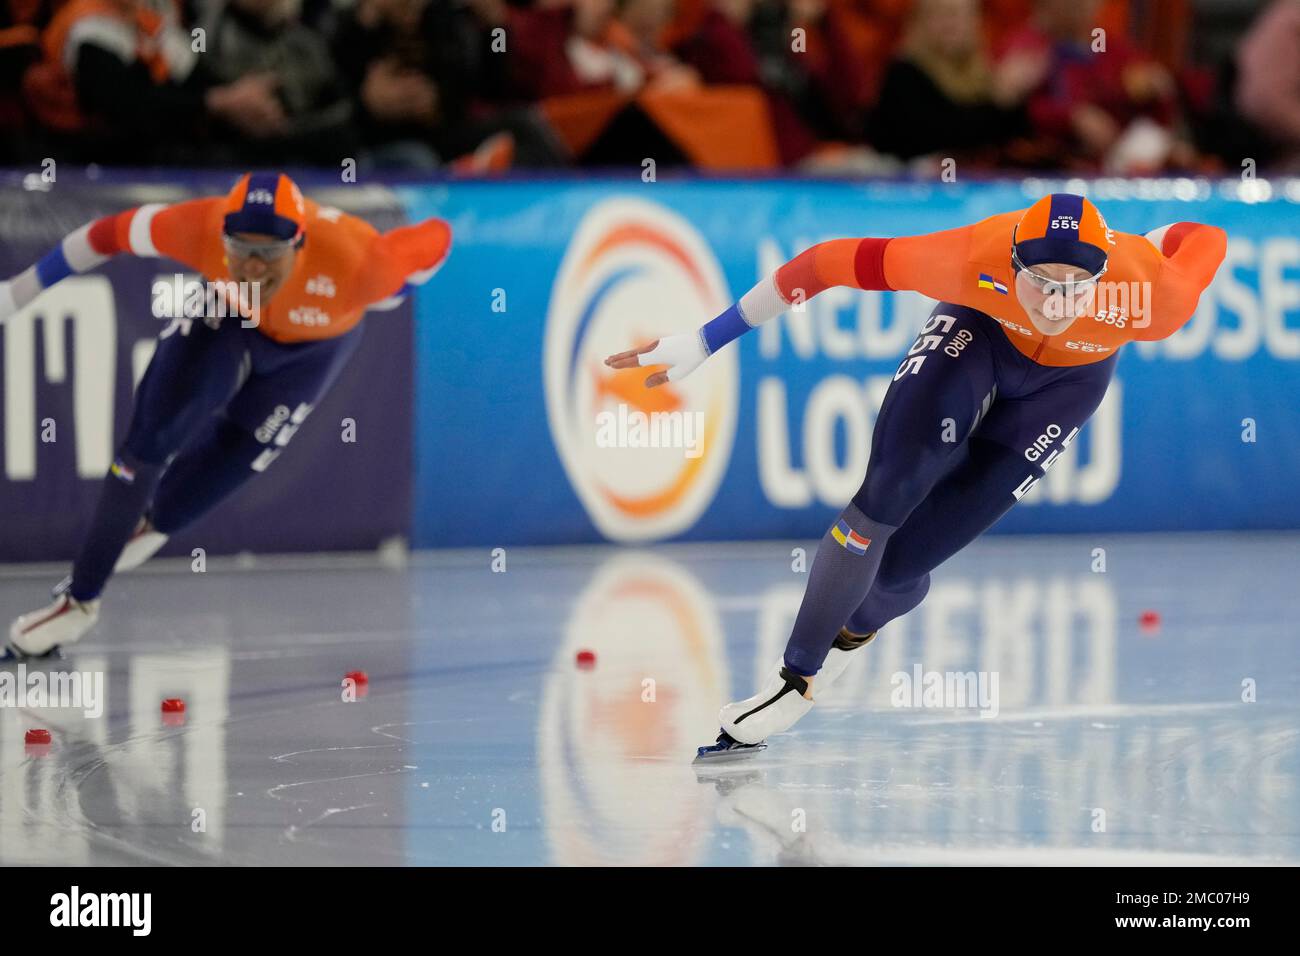 HEERENVEEN, NETHERLANDS - MARCH 3: Dai Dai N'tab of Netherlands competing  on the 500m Men during the ISU World Speed Skating Championships 2023 on  March 3, 2023 in Heerenveen, Netherlands (Photo by